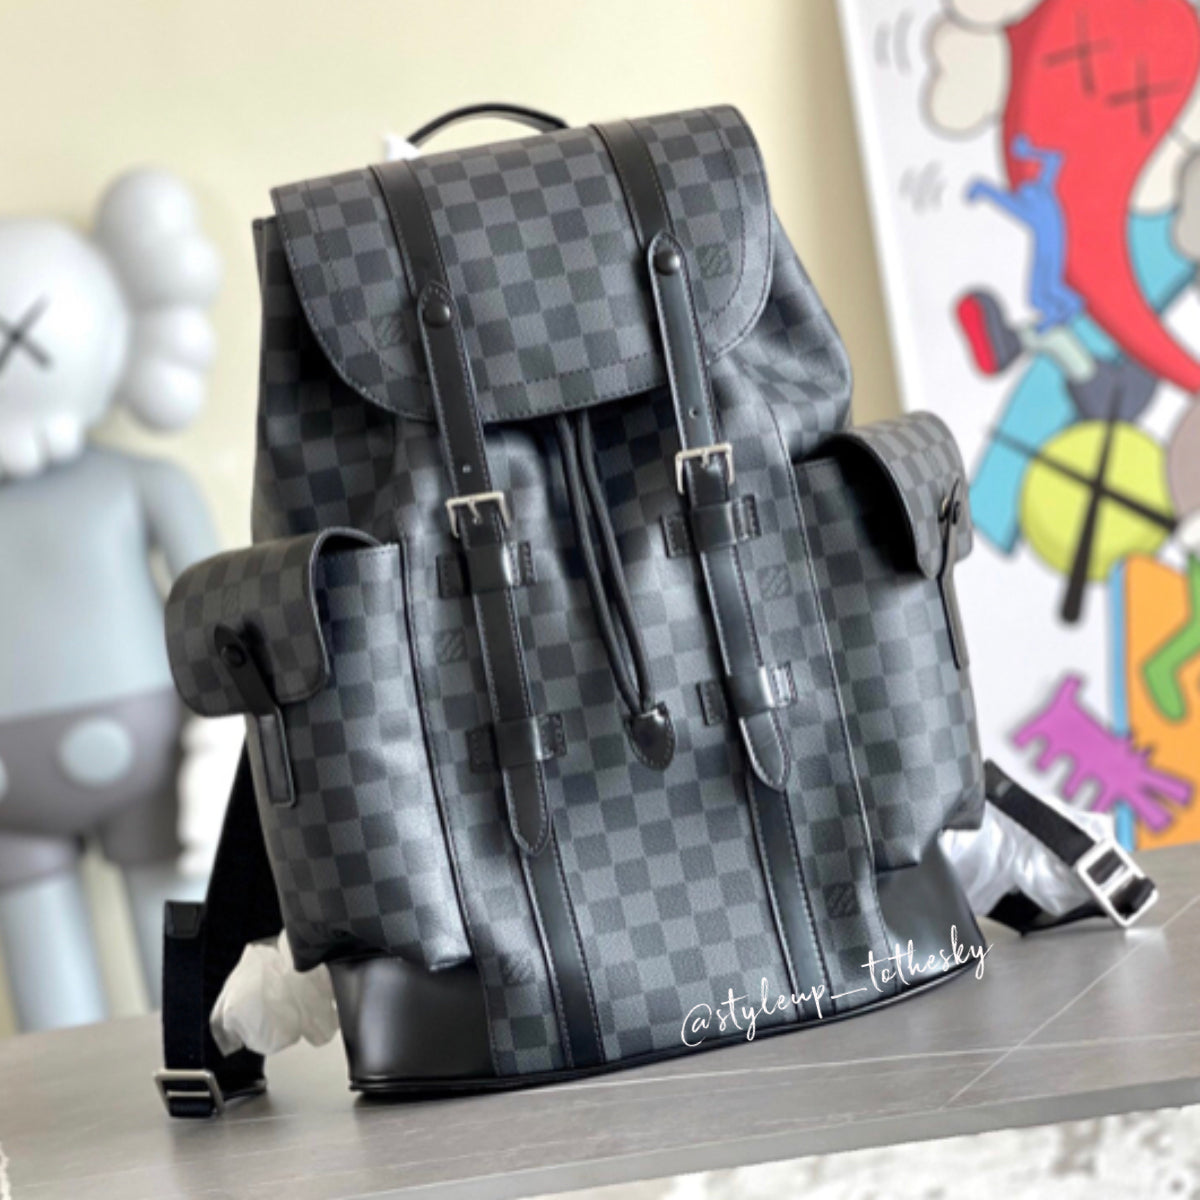 vuitton christopher backpack real vs